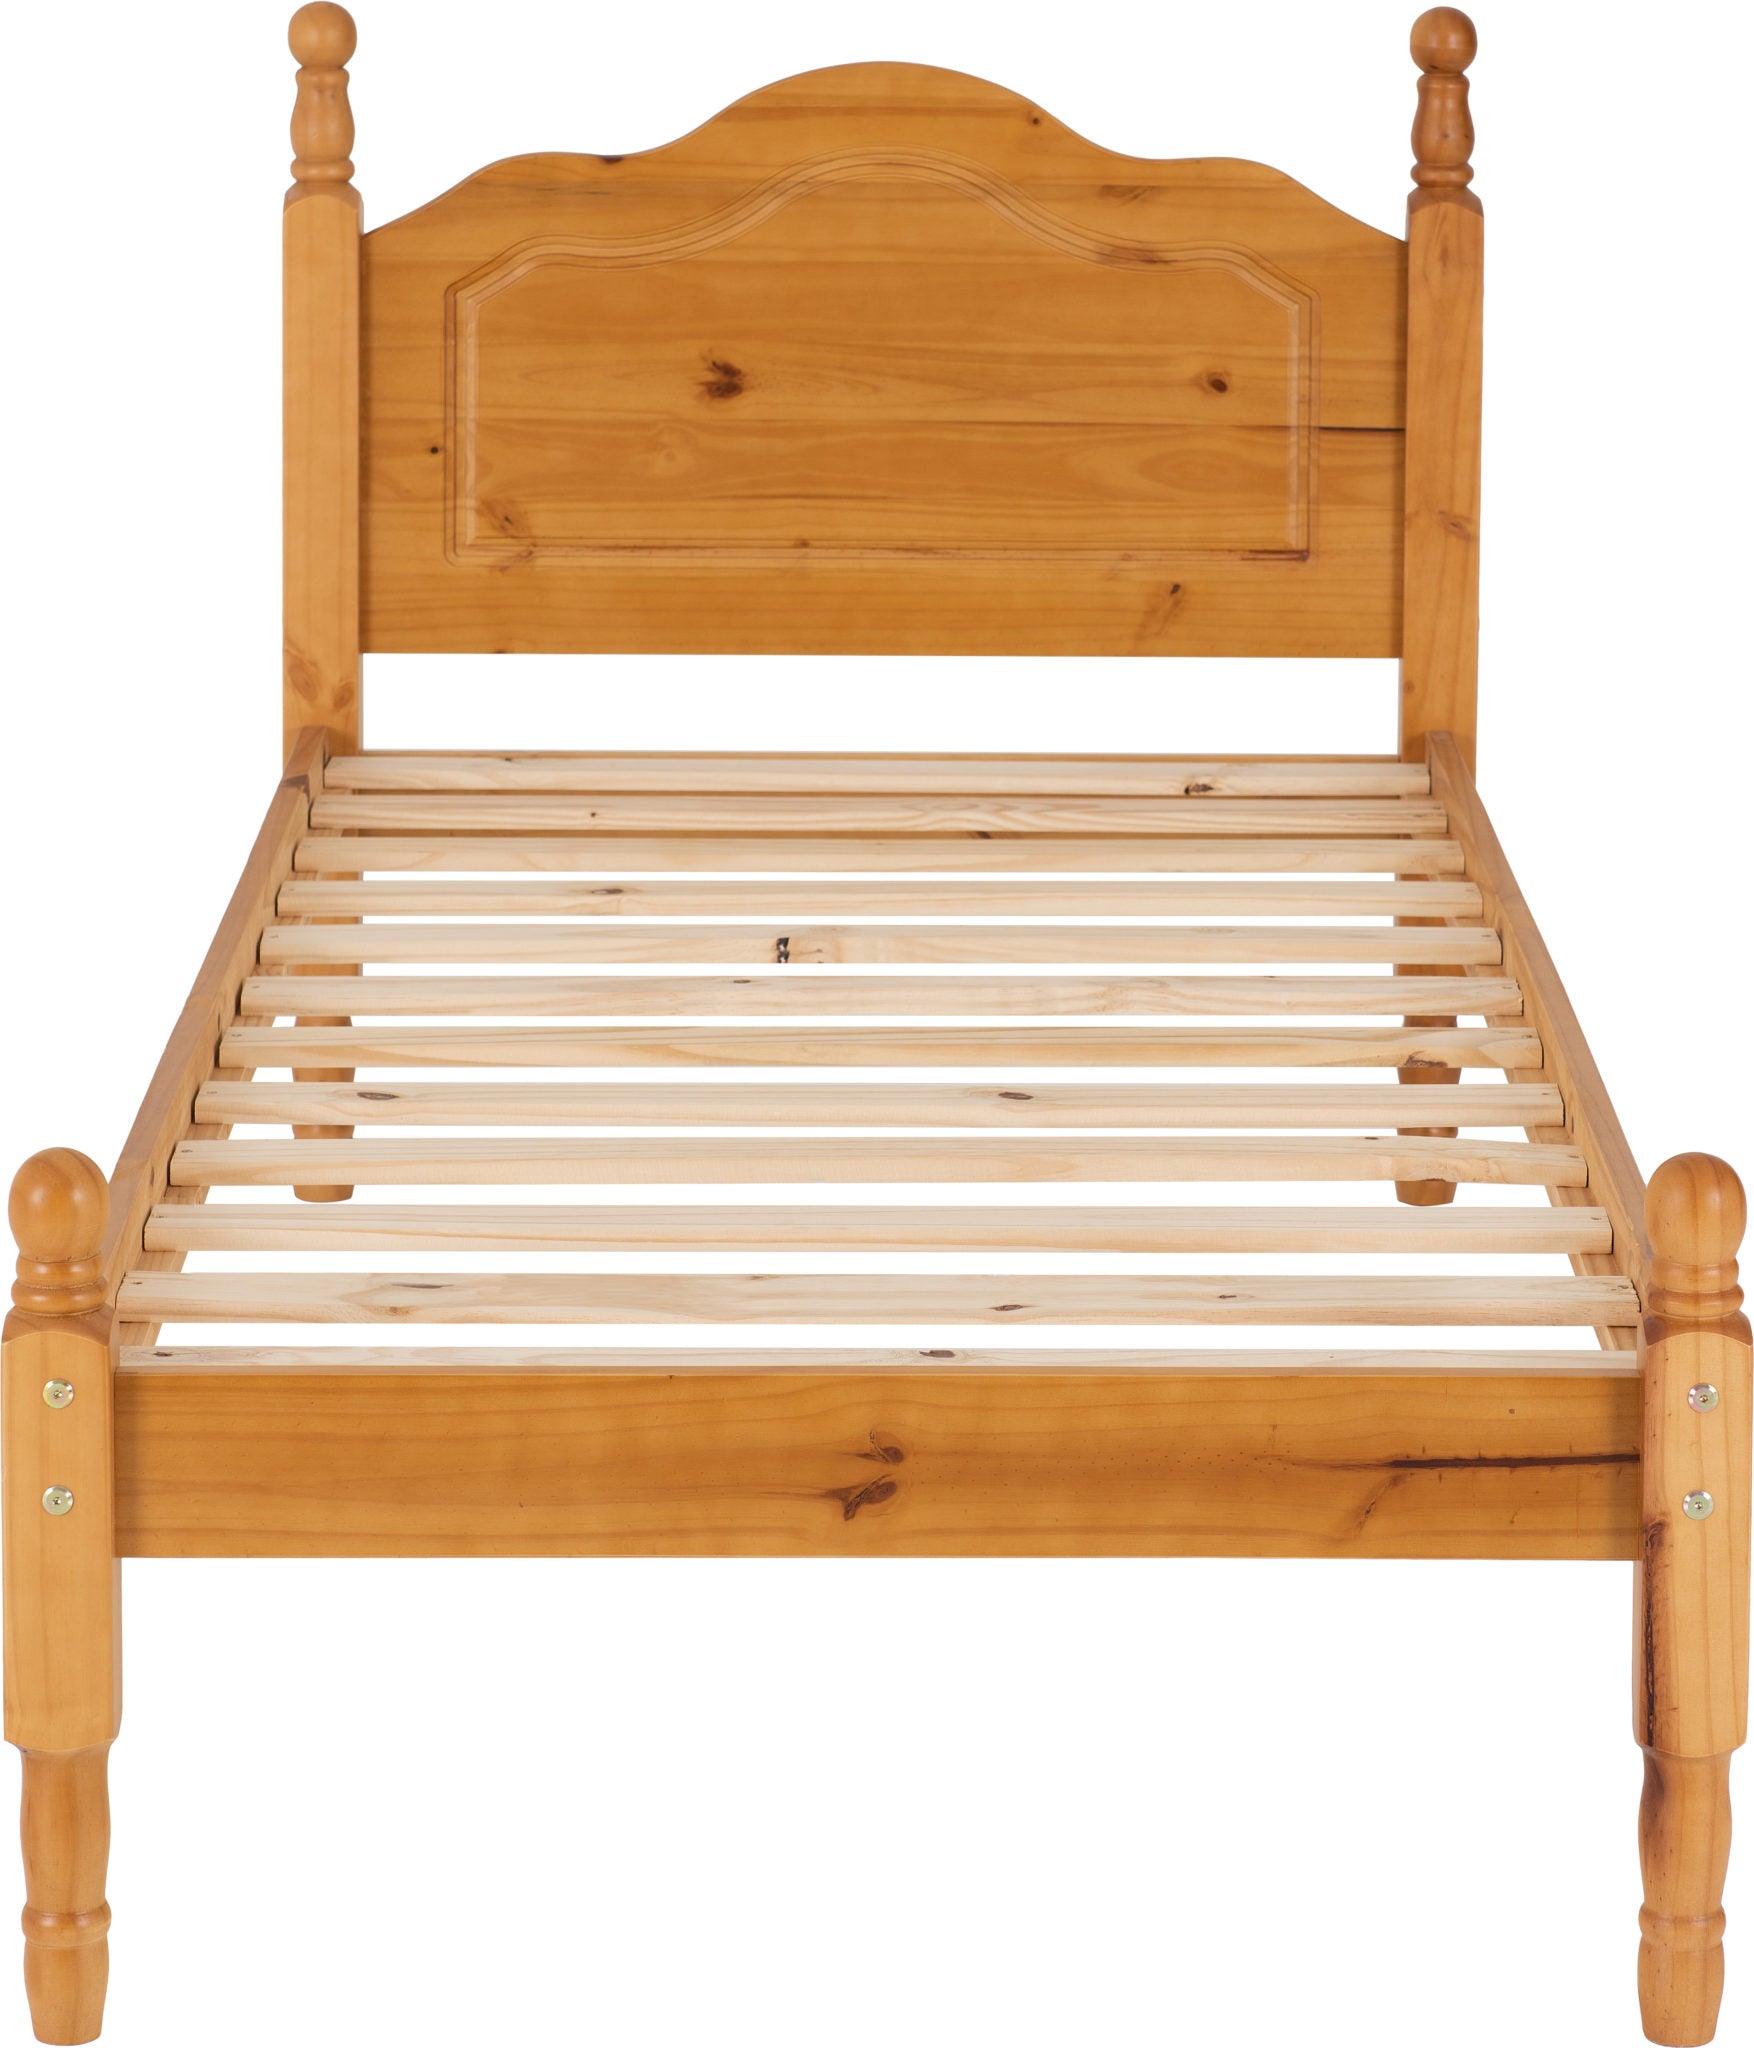 SOL-3-BED-ANTIQUE-PINE-2020-200-201-035-08-scaled.jpg